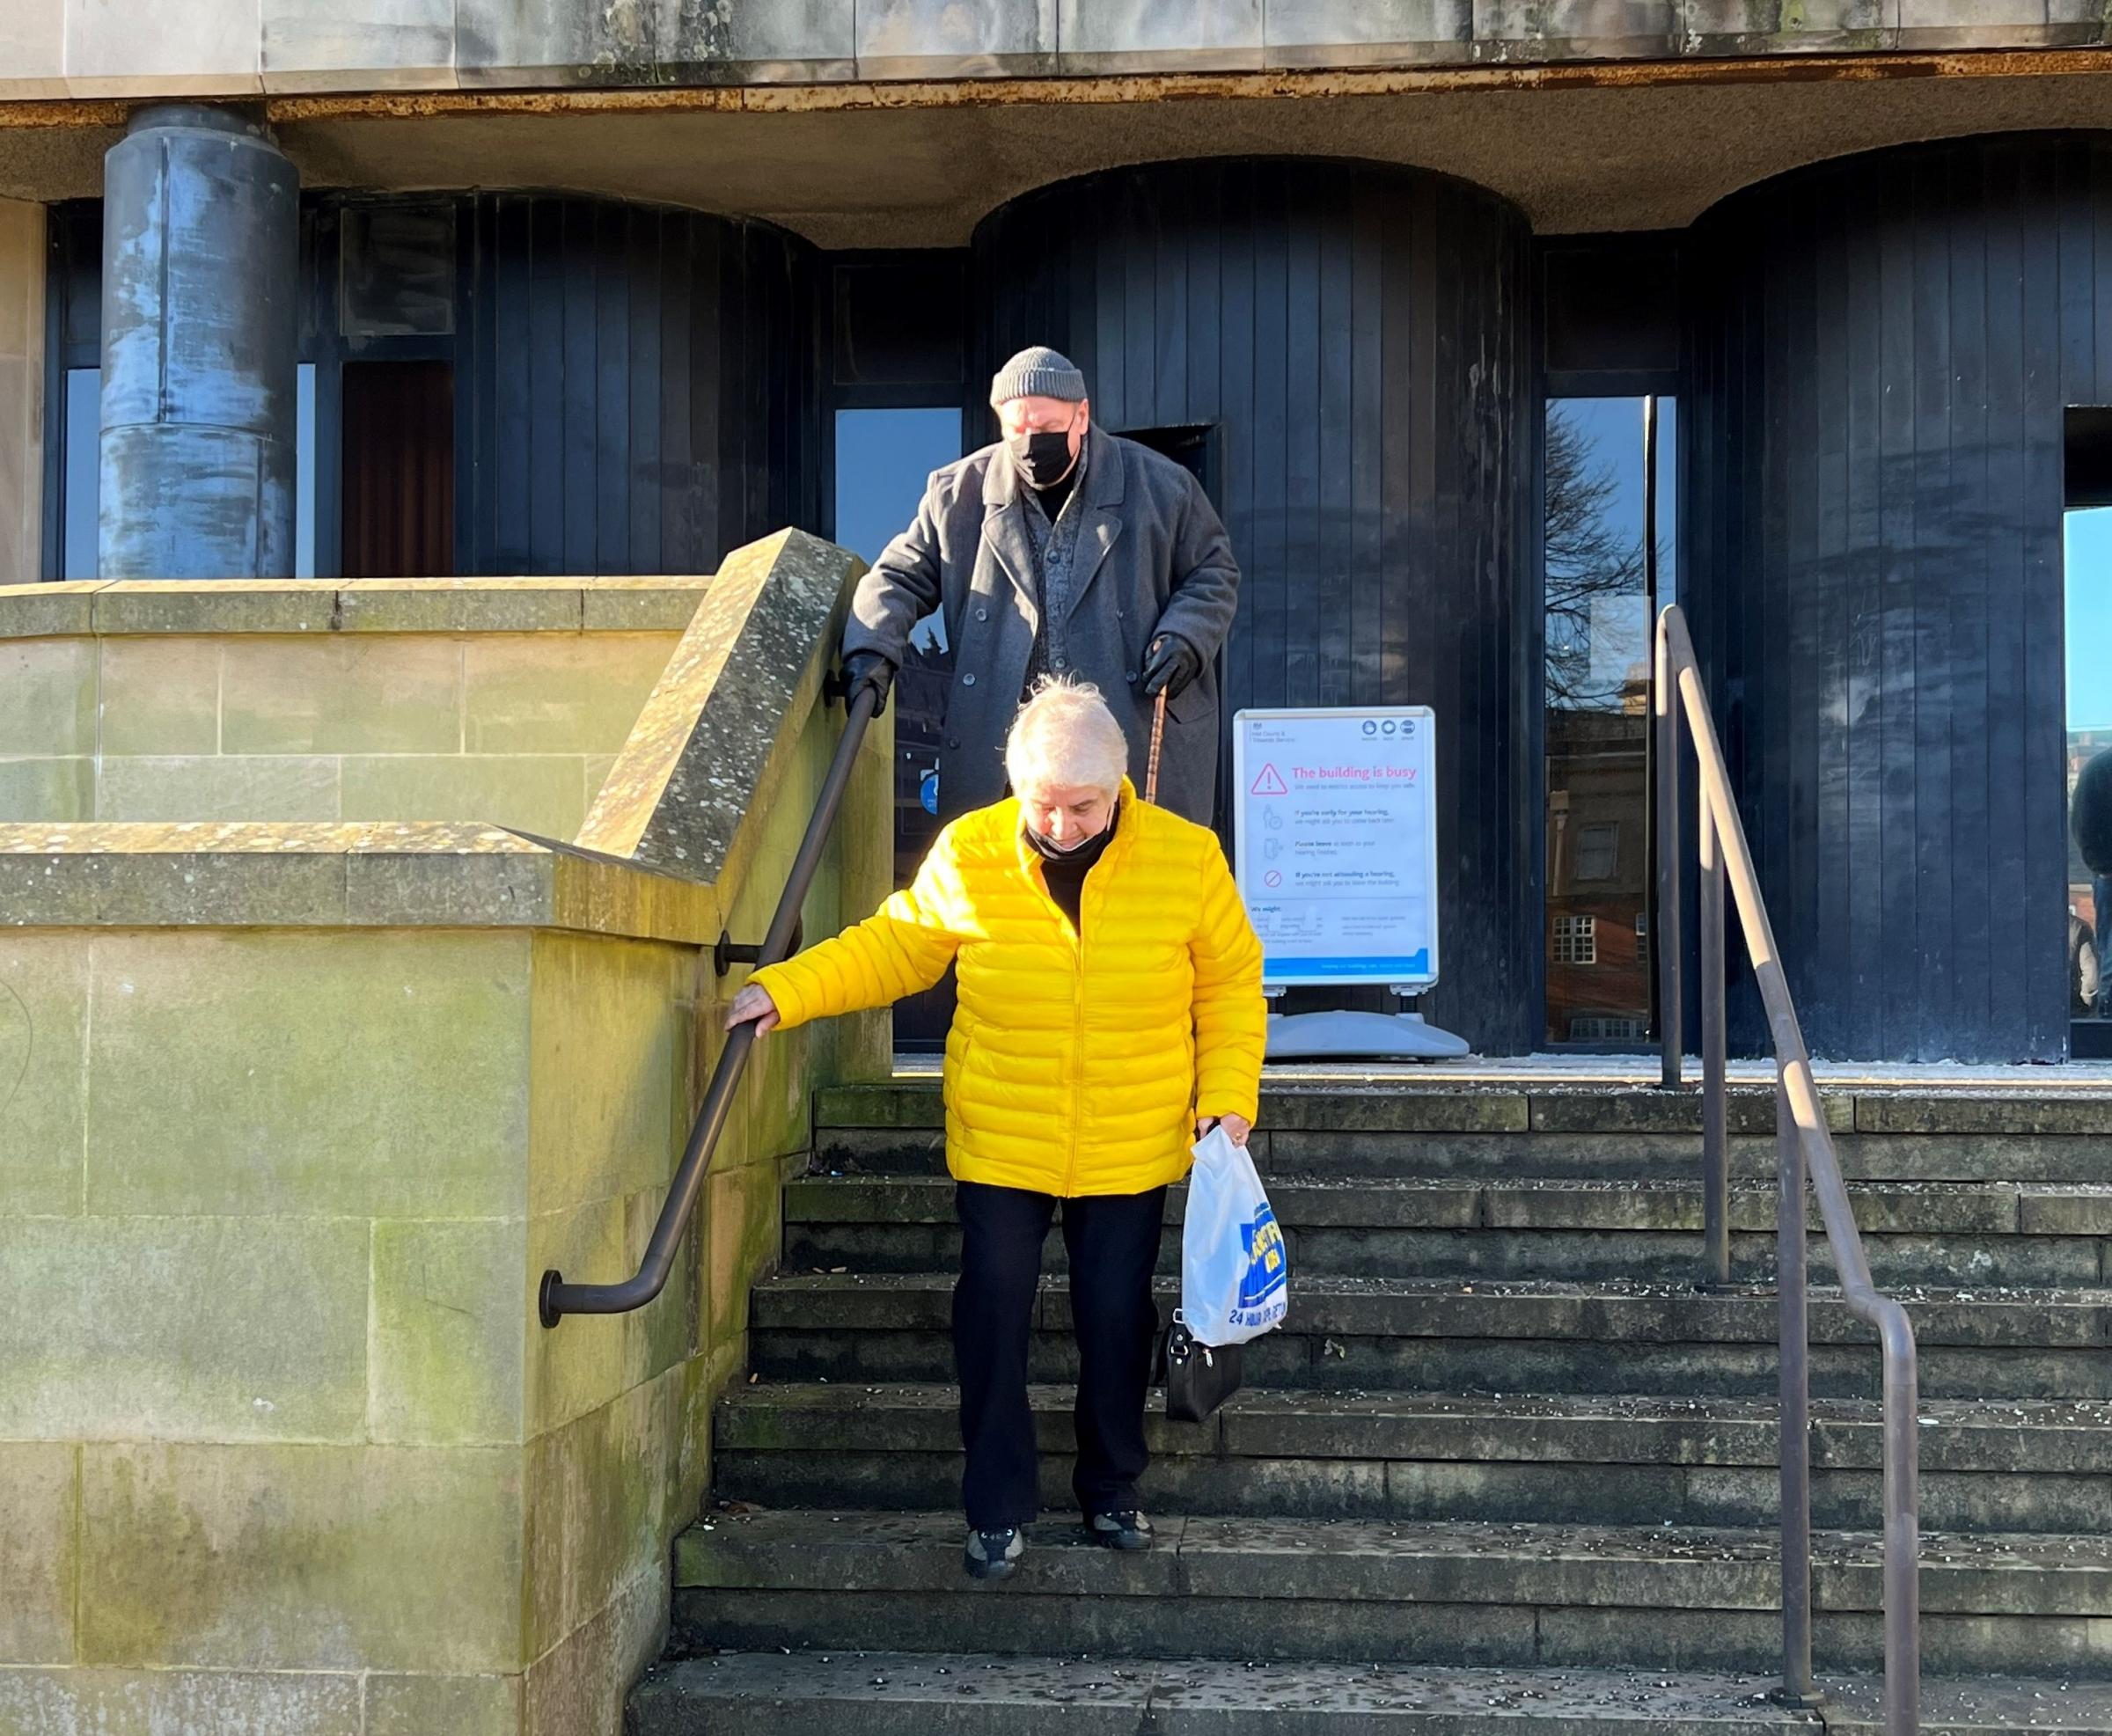 Snowball row: Pensioners, 75, in court after neighbour dispute